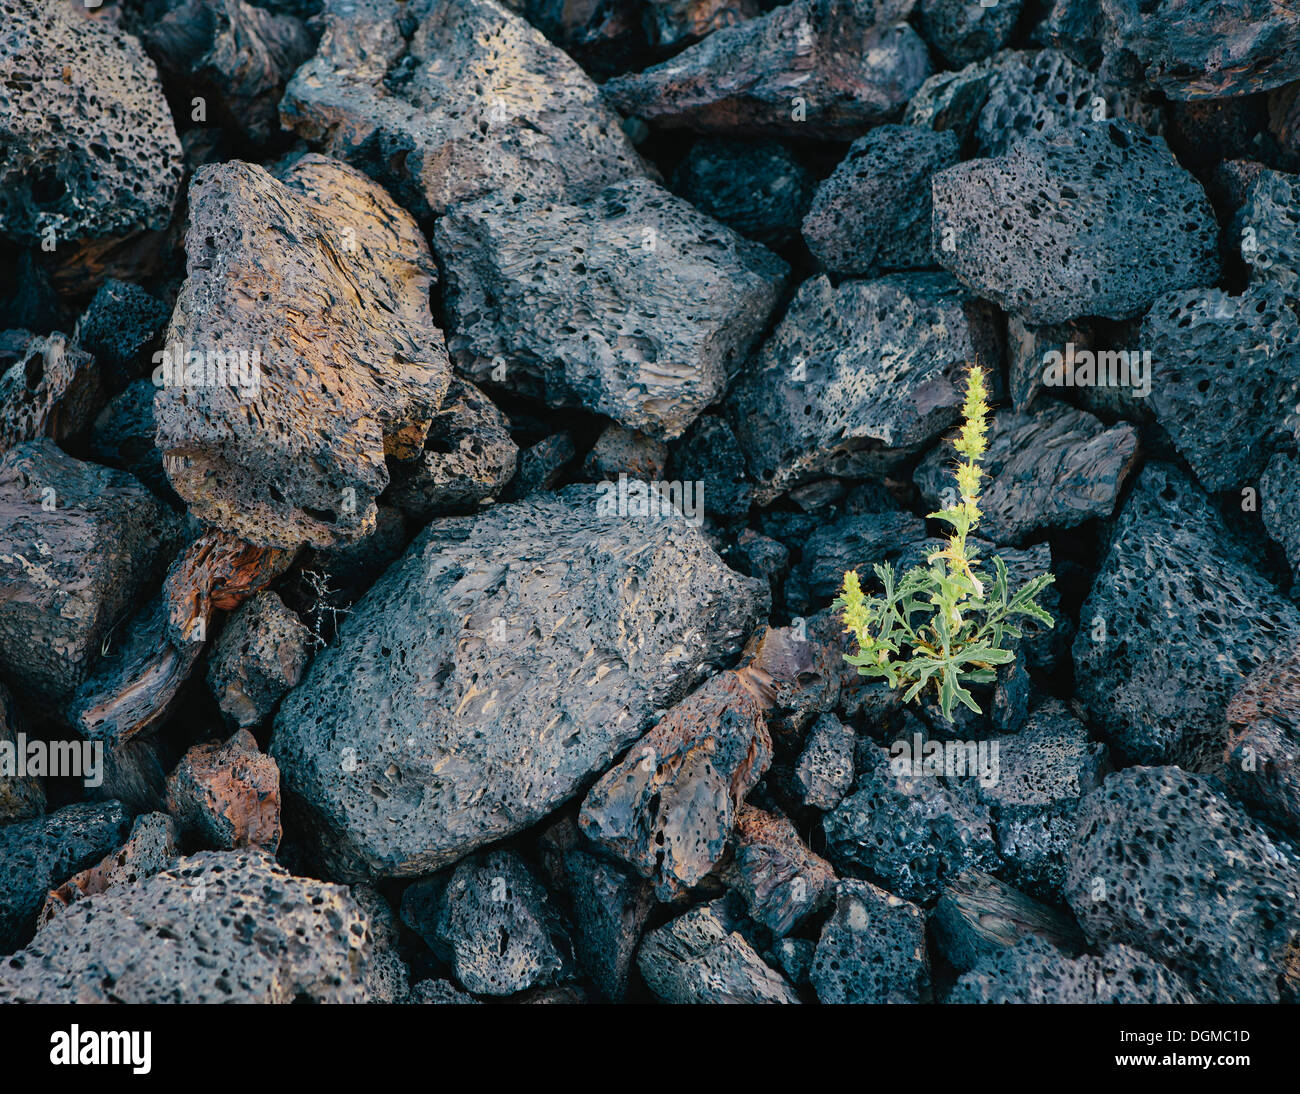 small green shoot volcanic rock Solidified lava fields Craters of the Moon National Monument Snake River Plain central Idaho Stock Photo